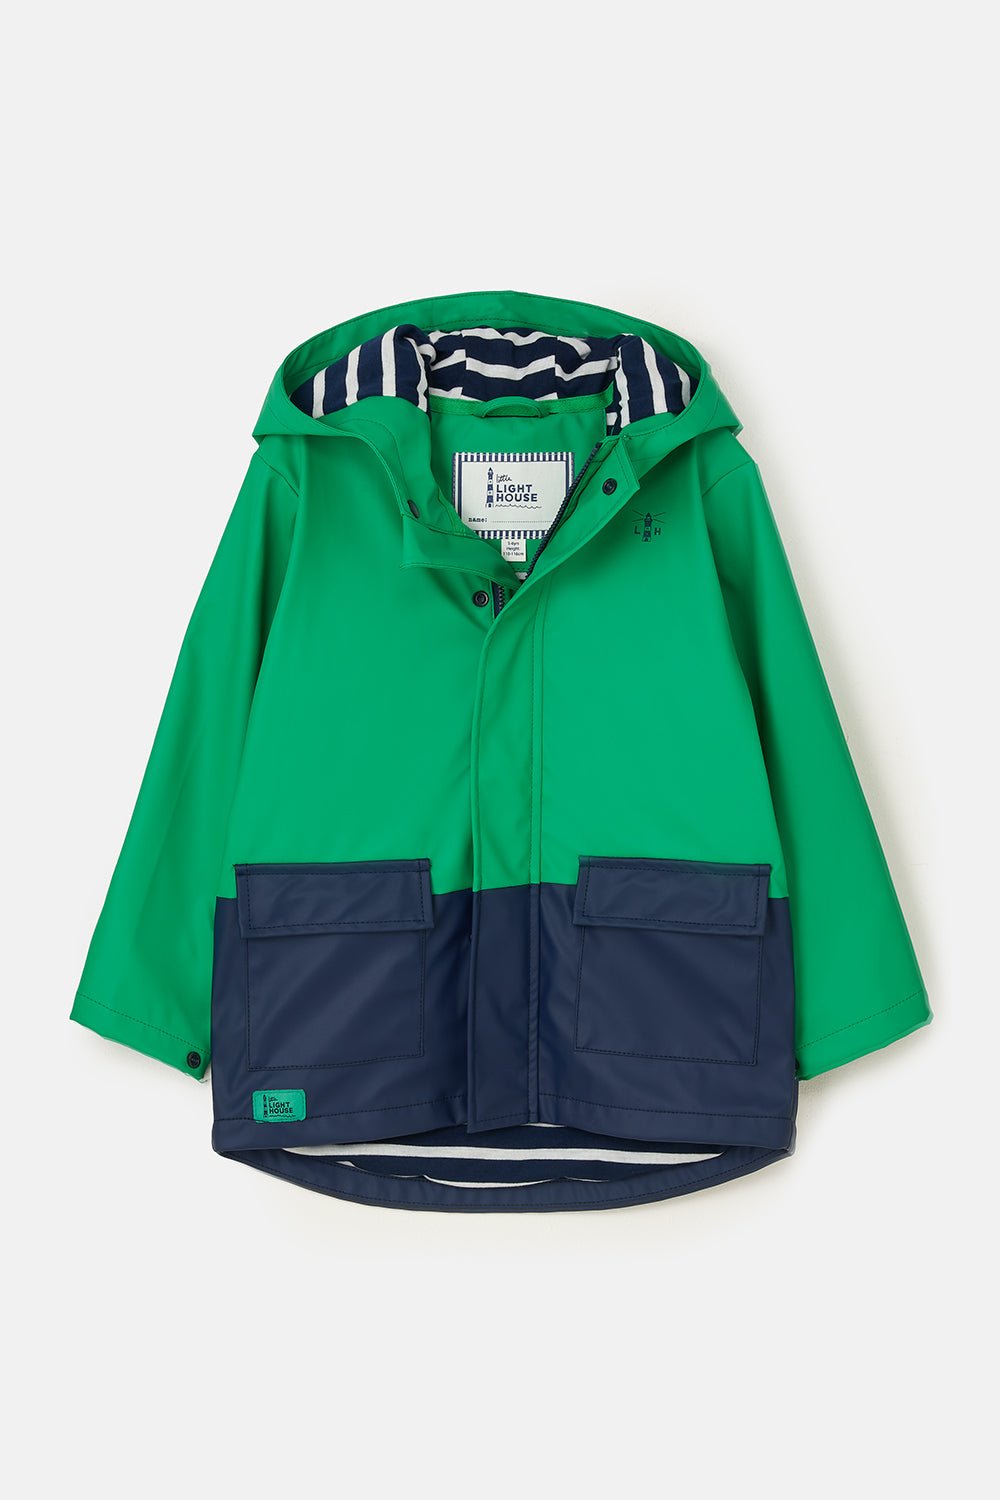 Anchor Jacket - Peagreen Navy-Lighthouse